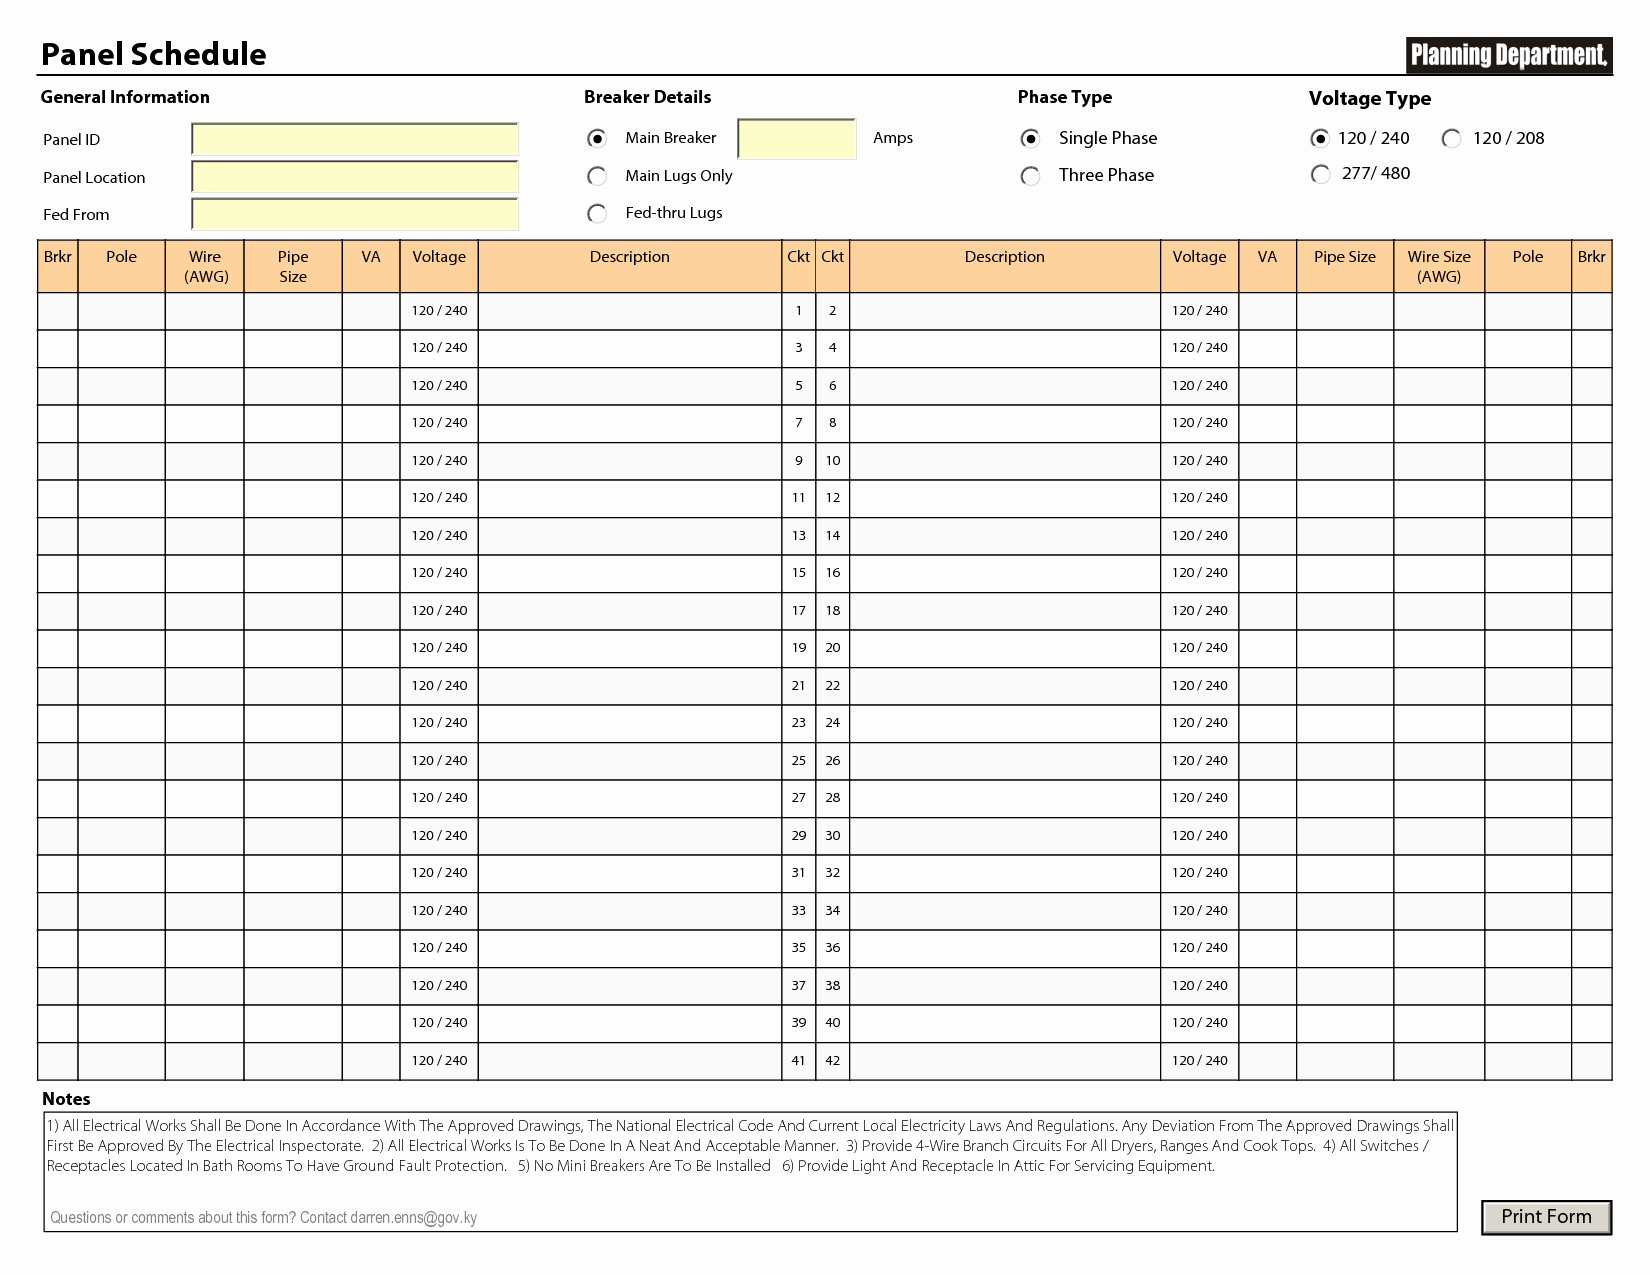 Electrical Panel Schedule Template Inspirational Electrical Panel Schedule Templates Tespin